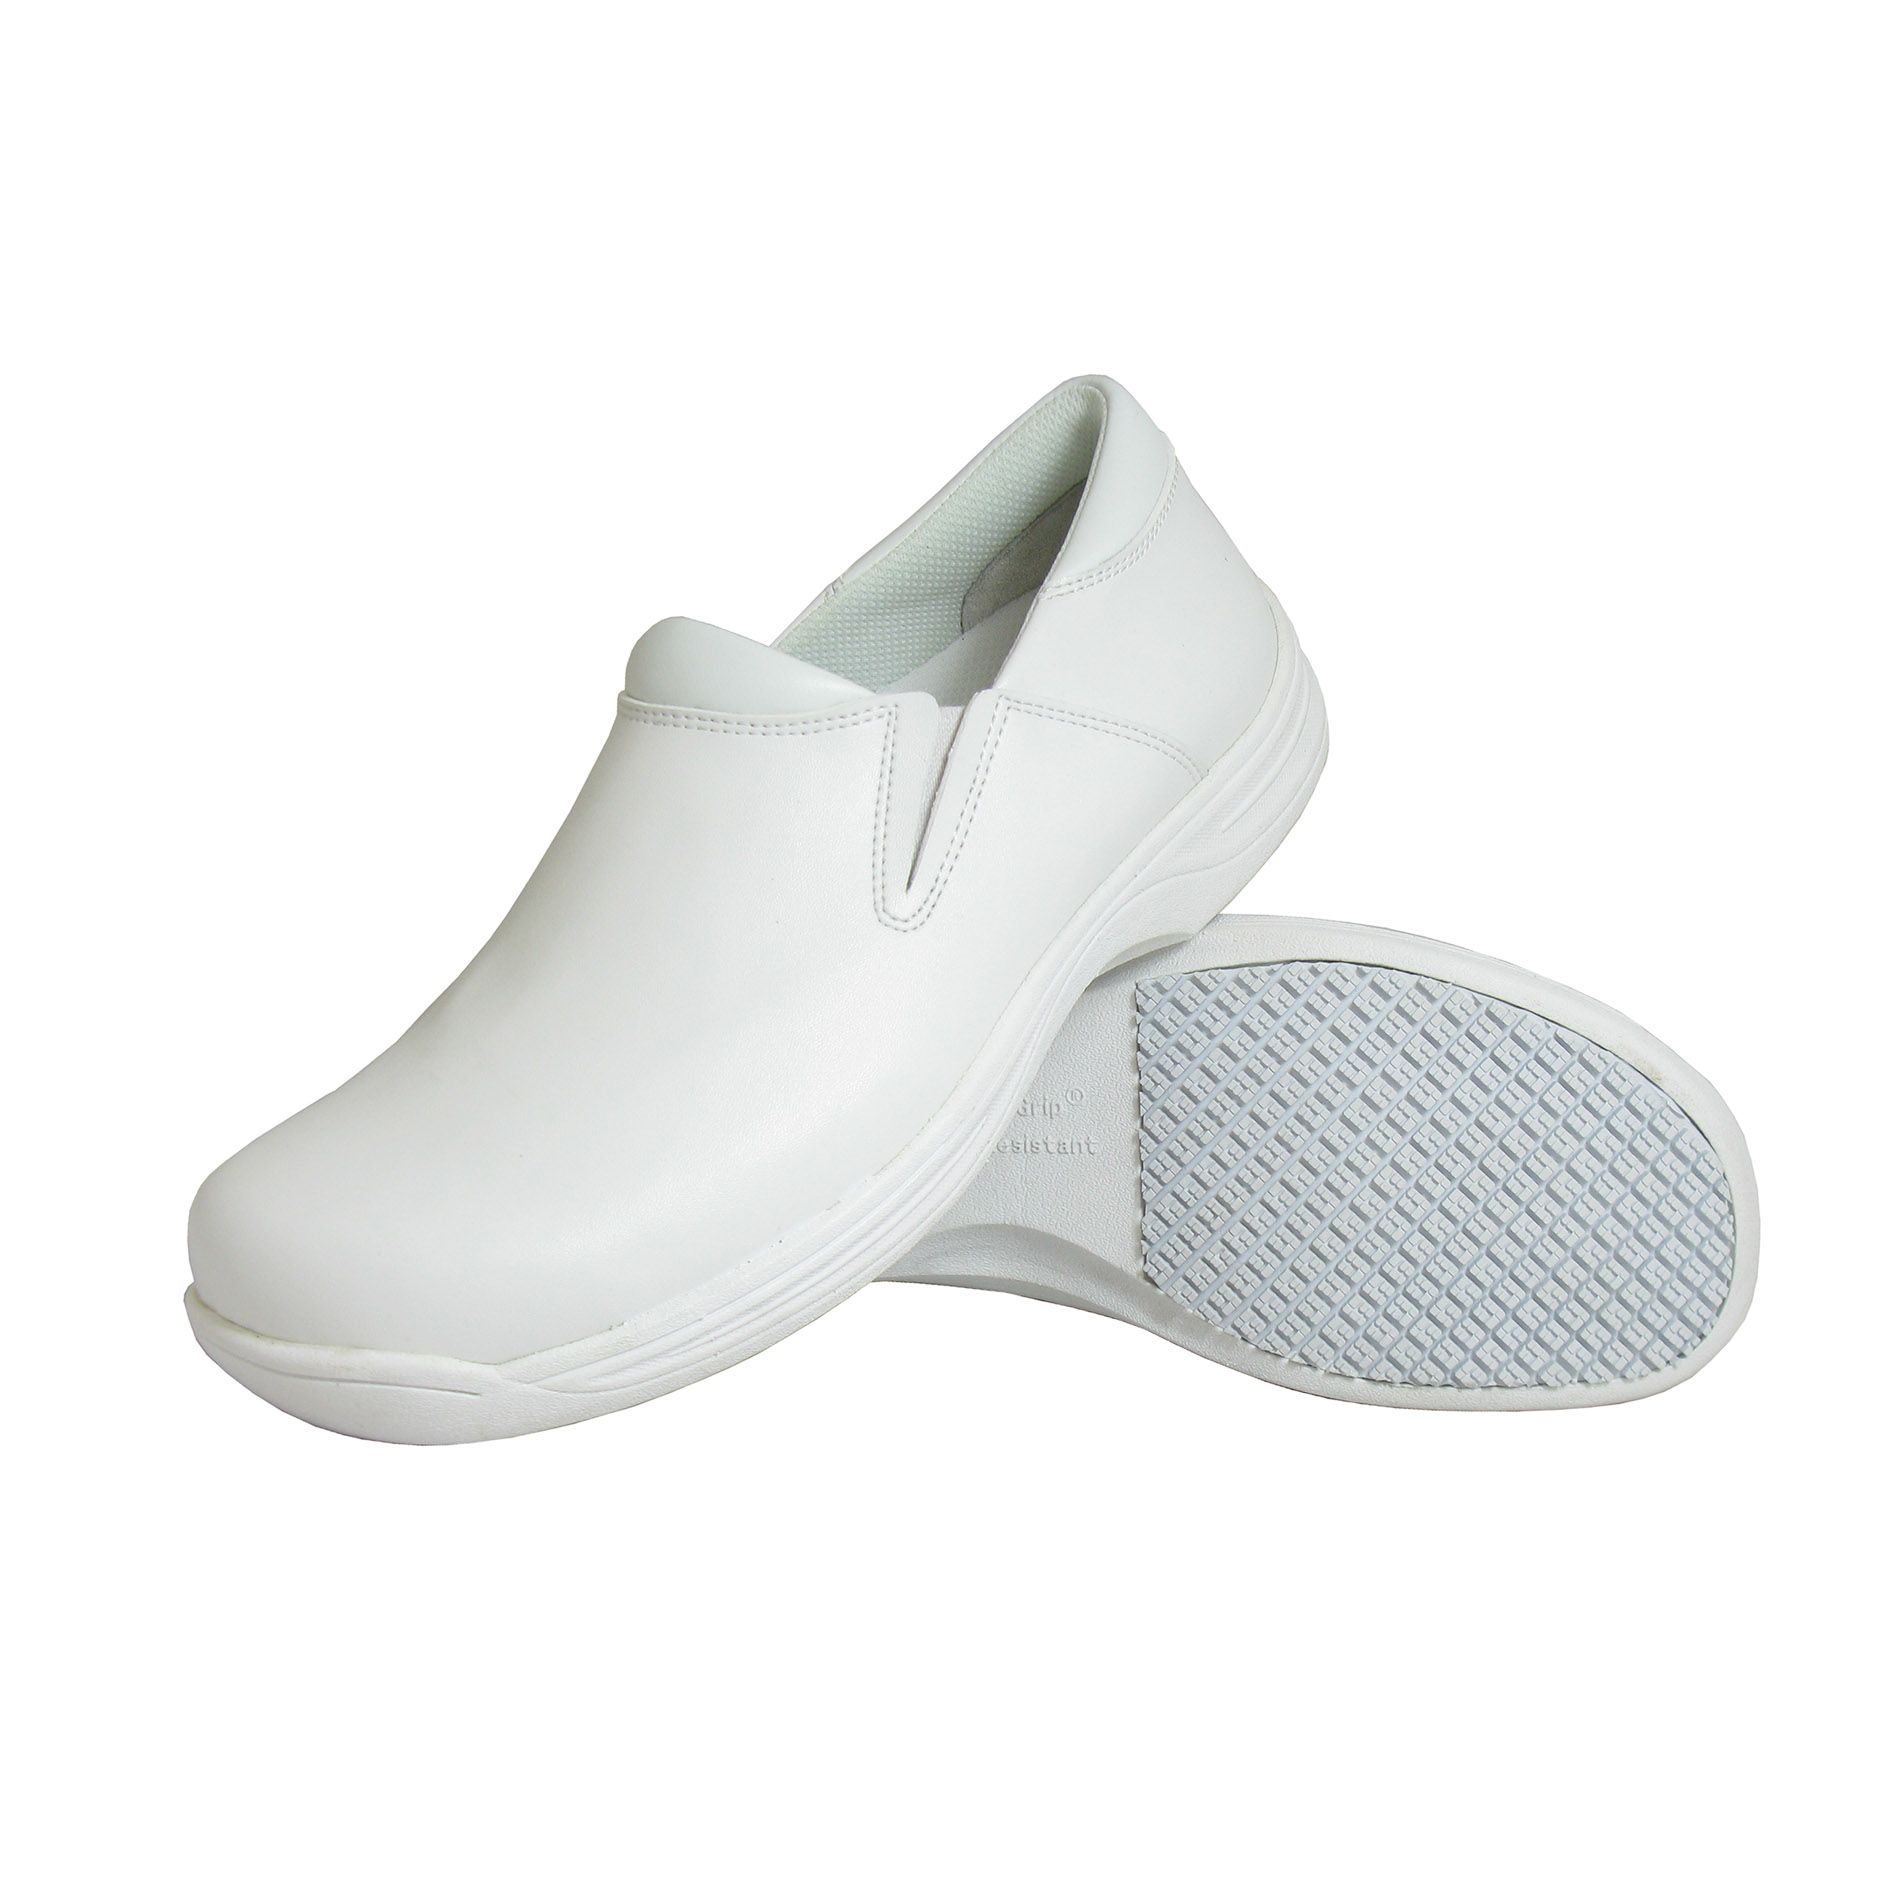 Genuine Grip Men's Slip-Resistant Leather Work Shoe #4705 Wide Width Available - White